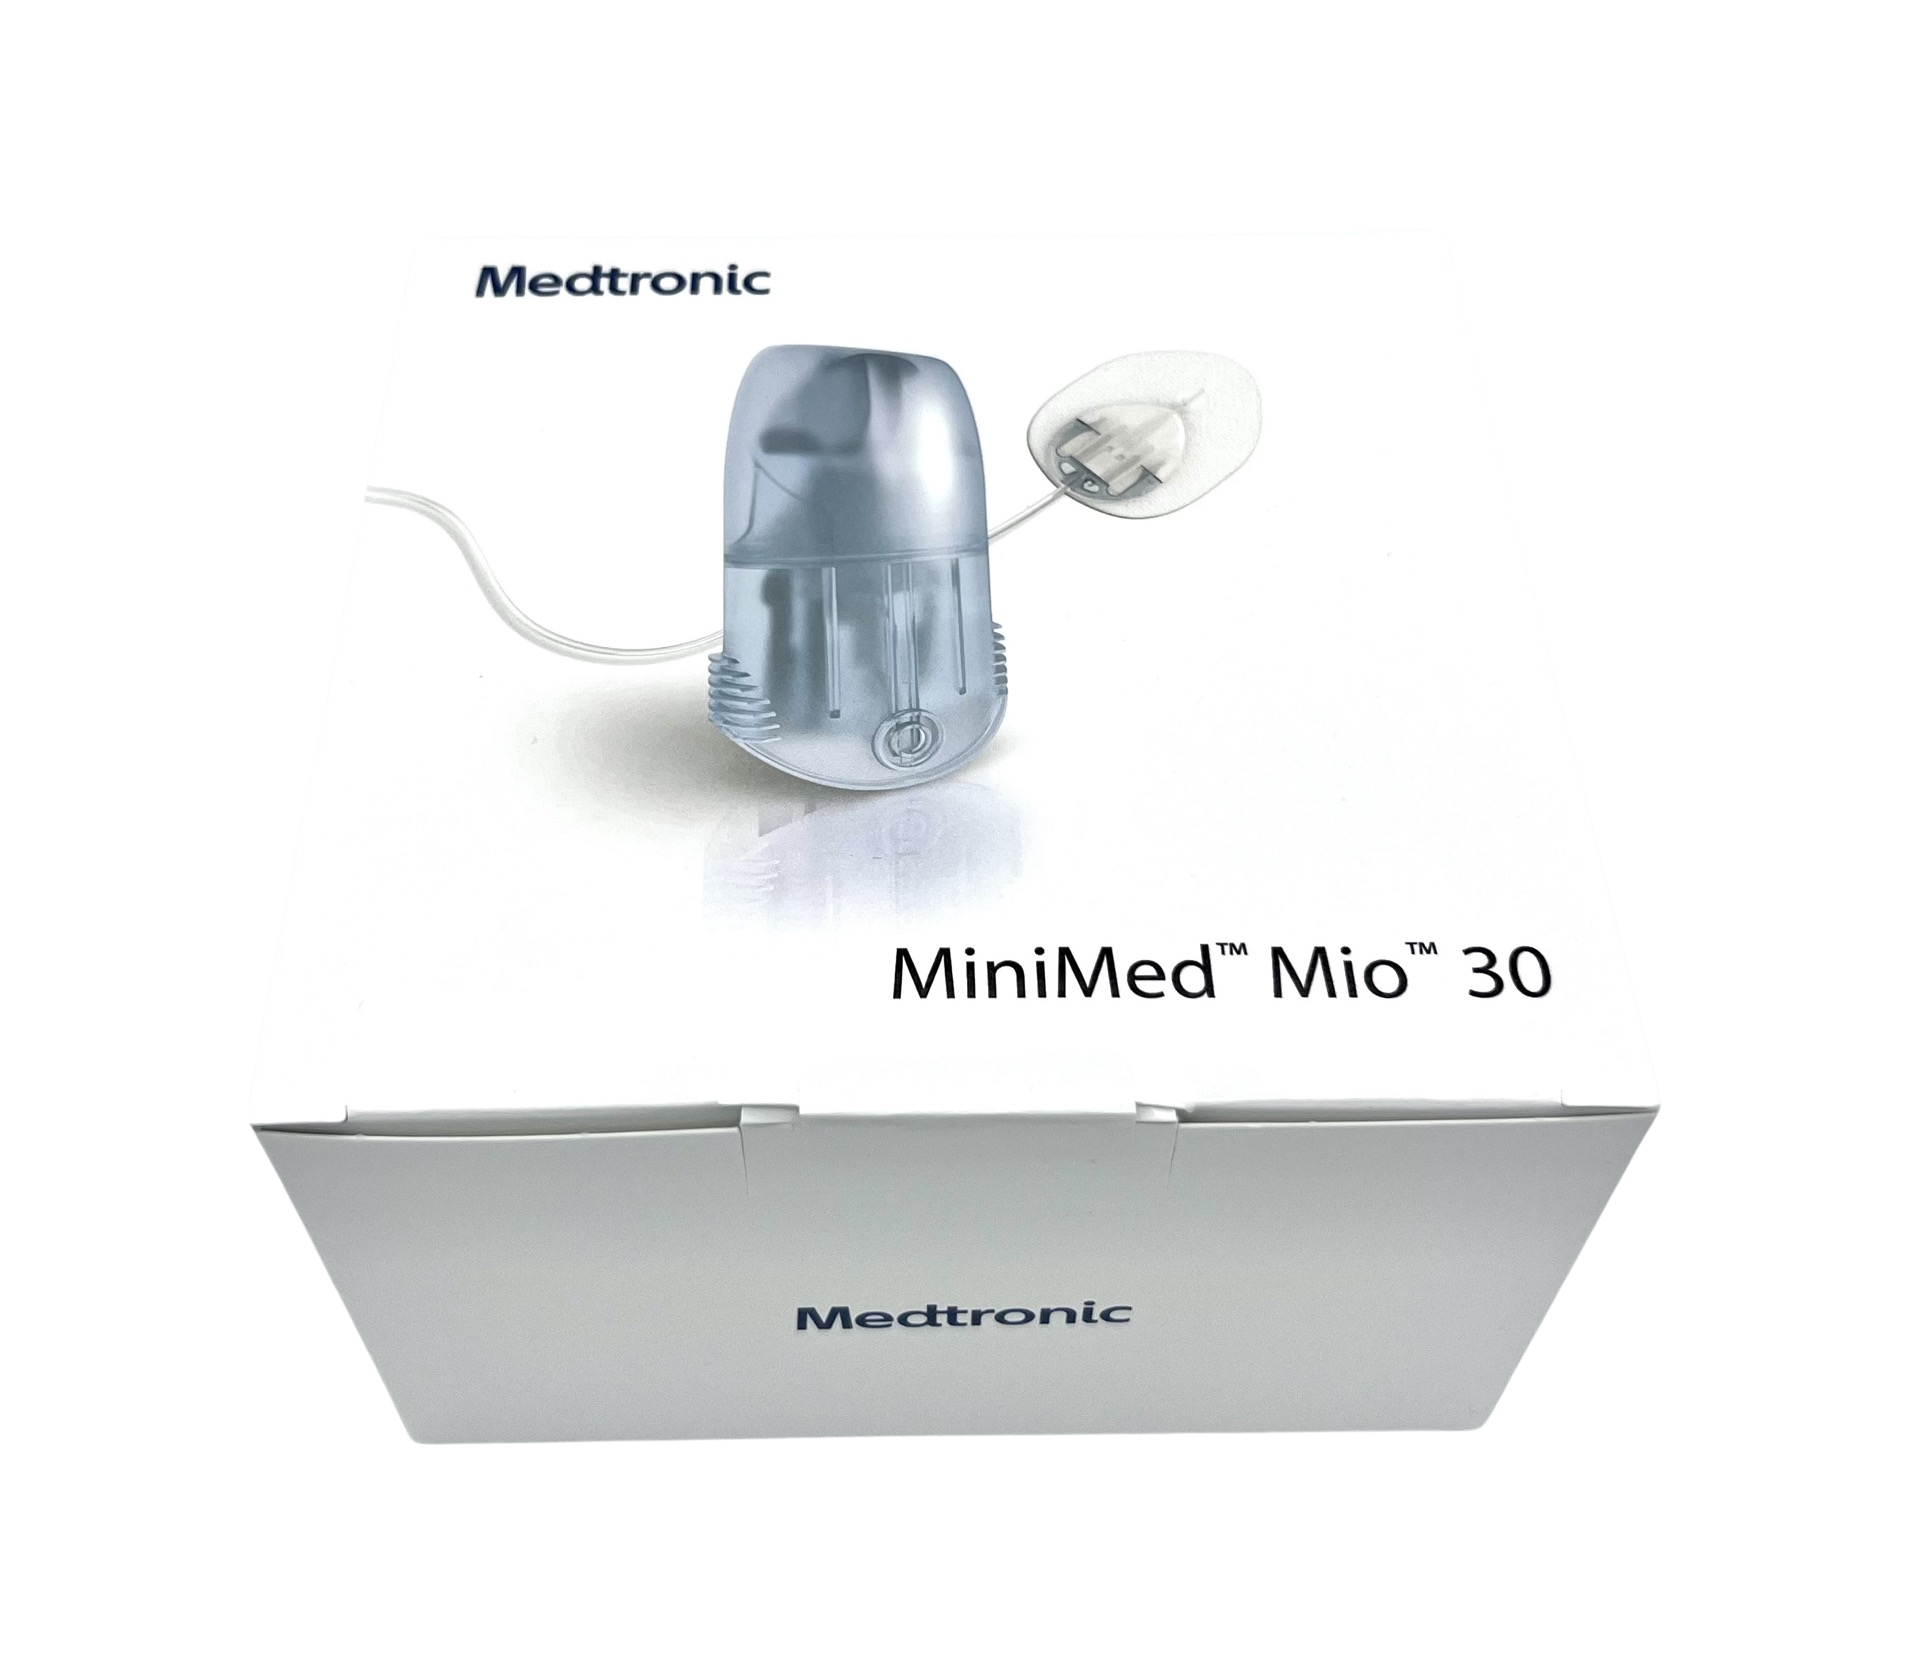 MiniMed  Mio 30 - 13 mm / 110 cm - MMT-906A